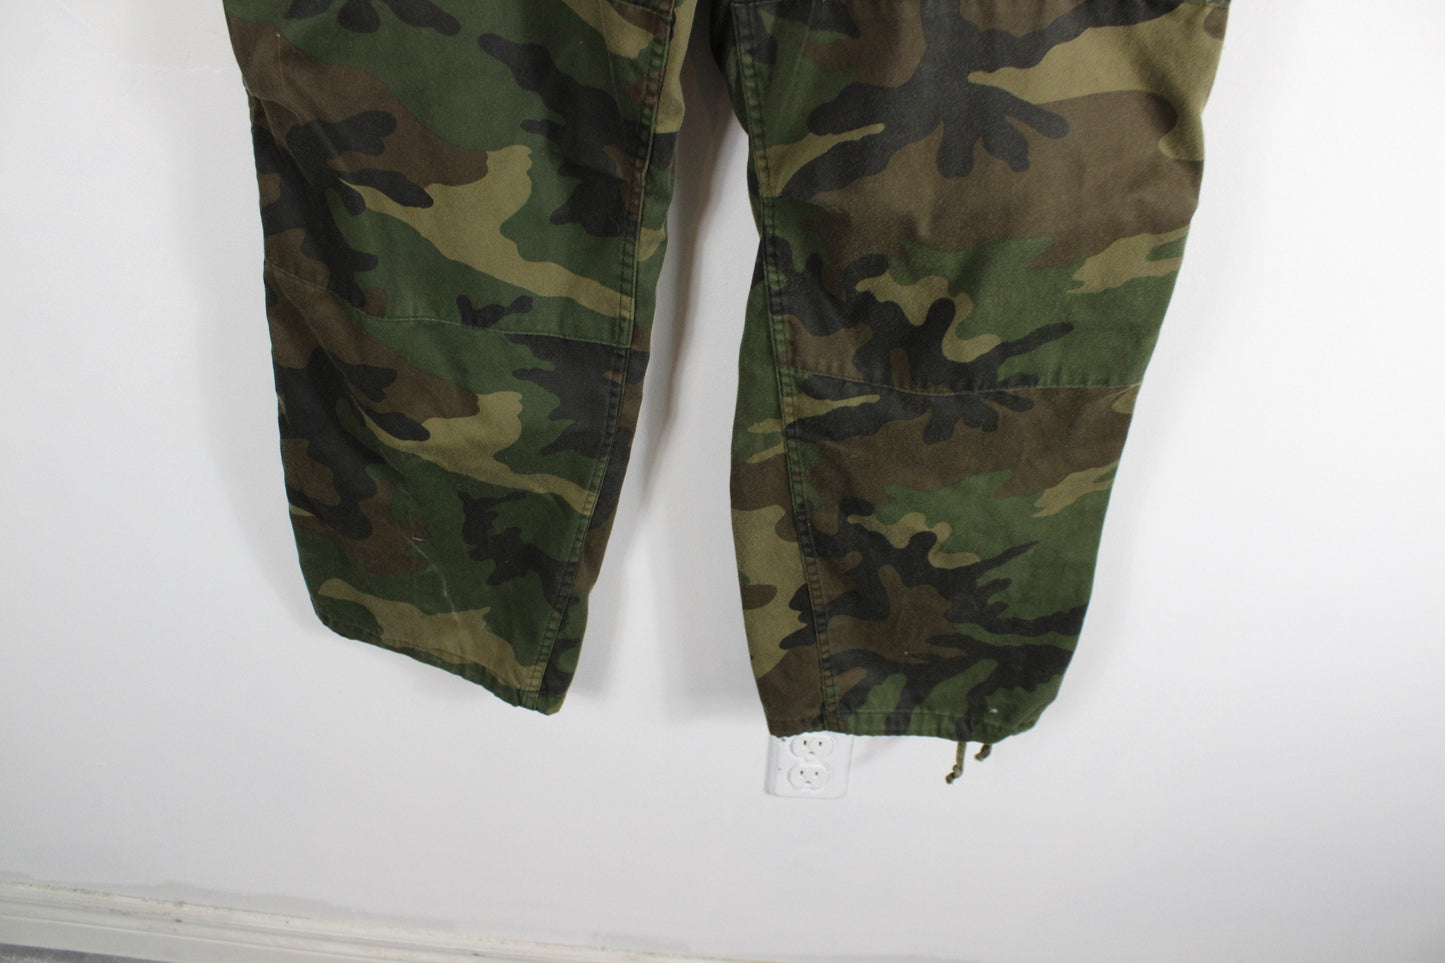 Vintage Camo Pants / Military Green Camouflage Combat Trouser / 90s Army Fatigue / 80s Surplus / 34 x 31